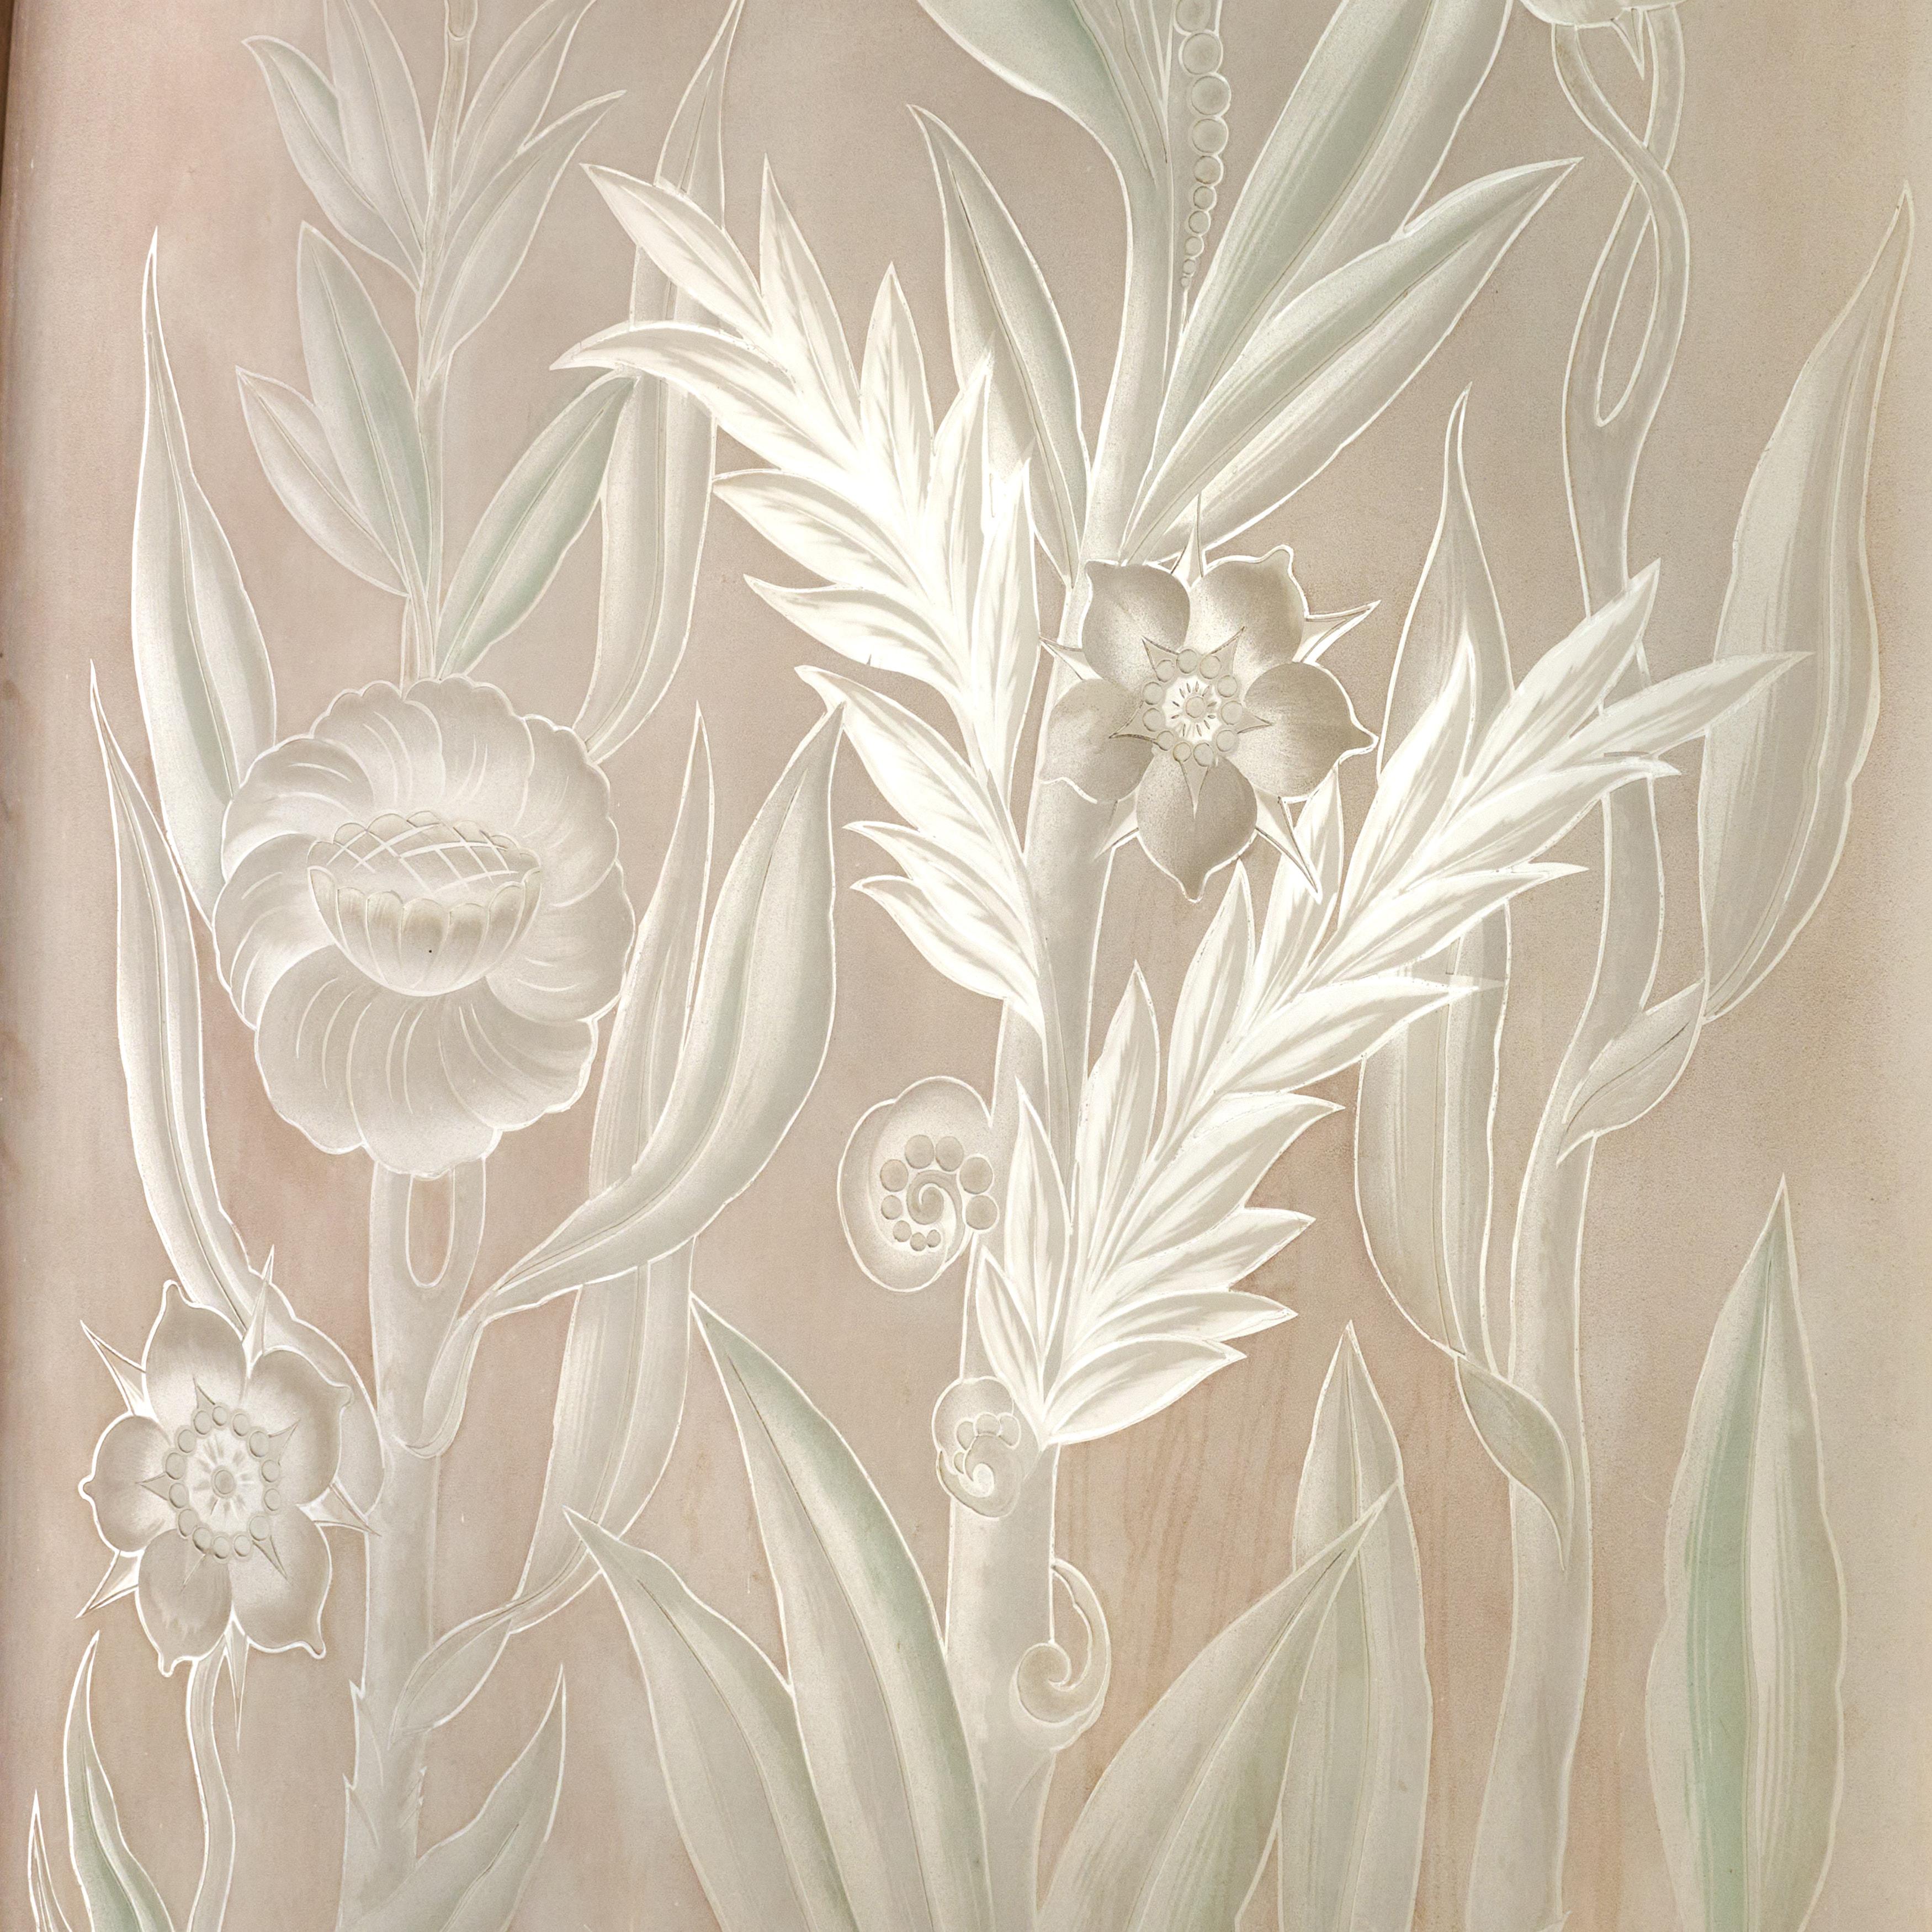 Pair of exceptional etched and wheel cut doors with original frame (frame not pictured). Glass signed by artist. From a mansion in Buenos Aires, Argentina.

